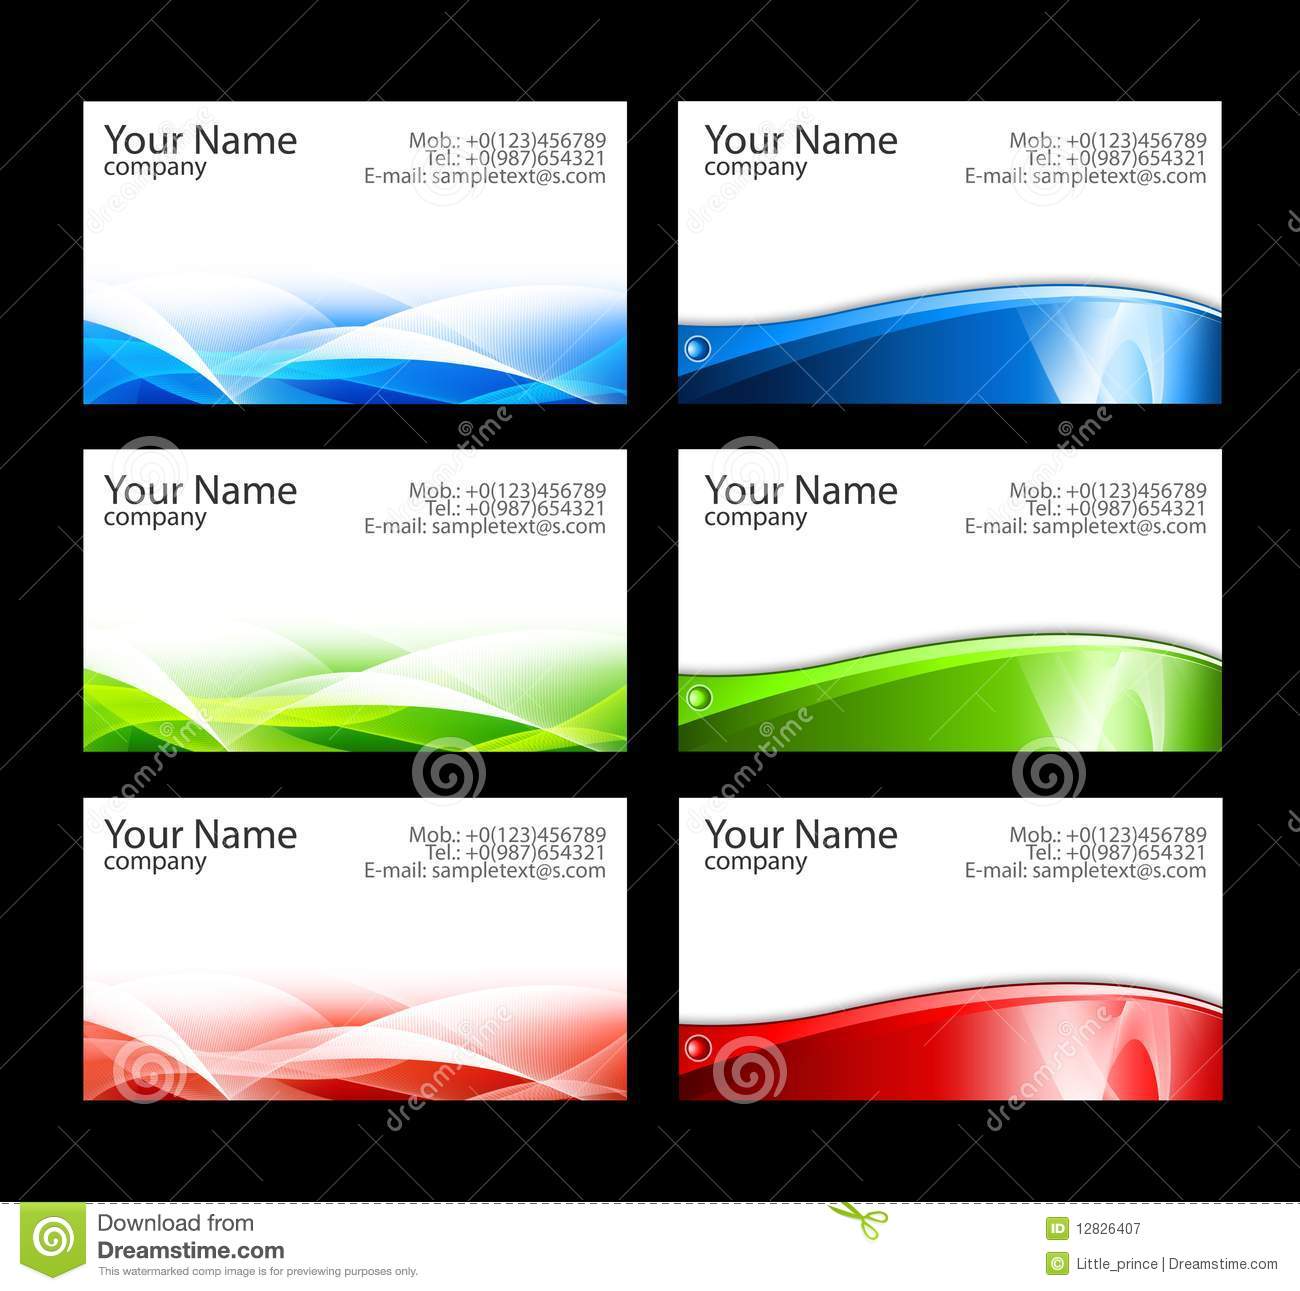 23 Business Card Templates Images - Free Business Card Template Pertaining To Business Card Template Word 2010